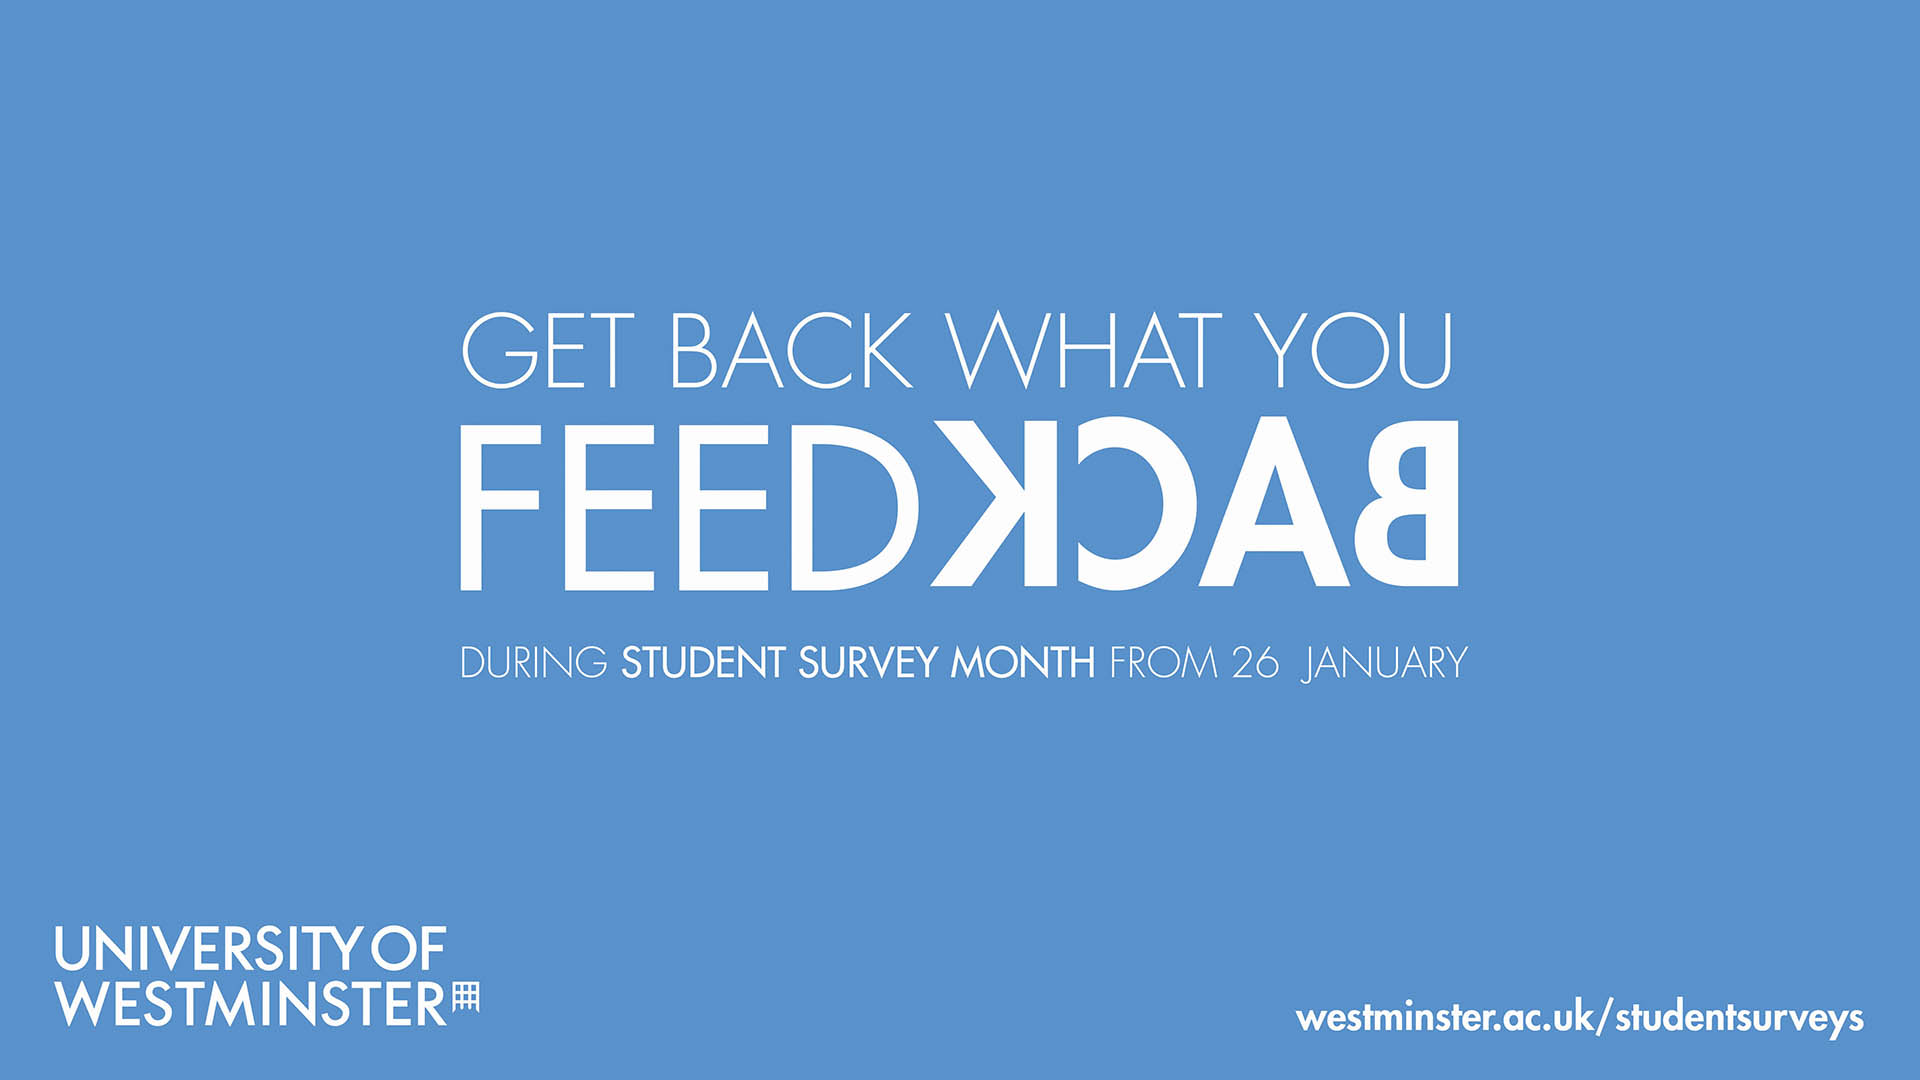 Promotion campaign for the university annual student survey